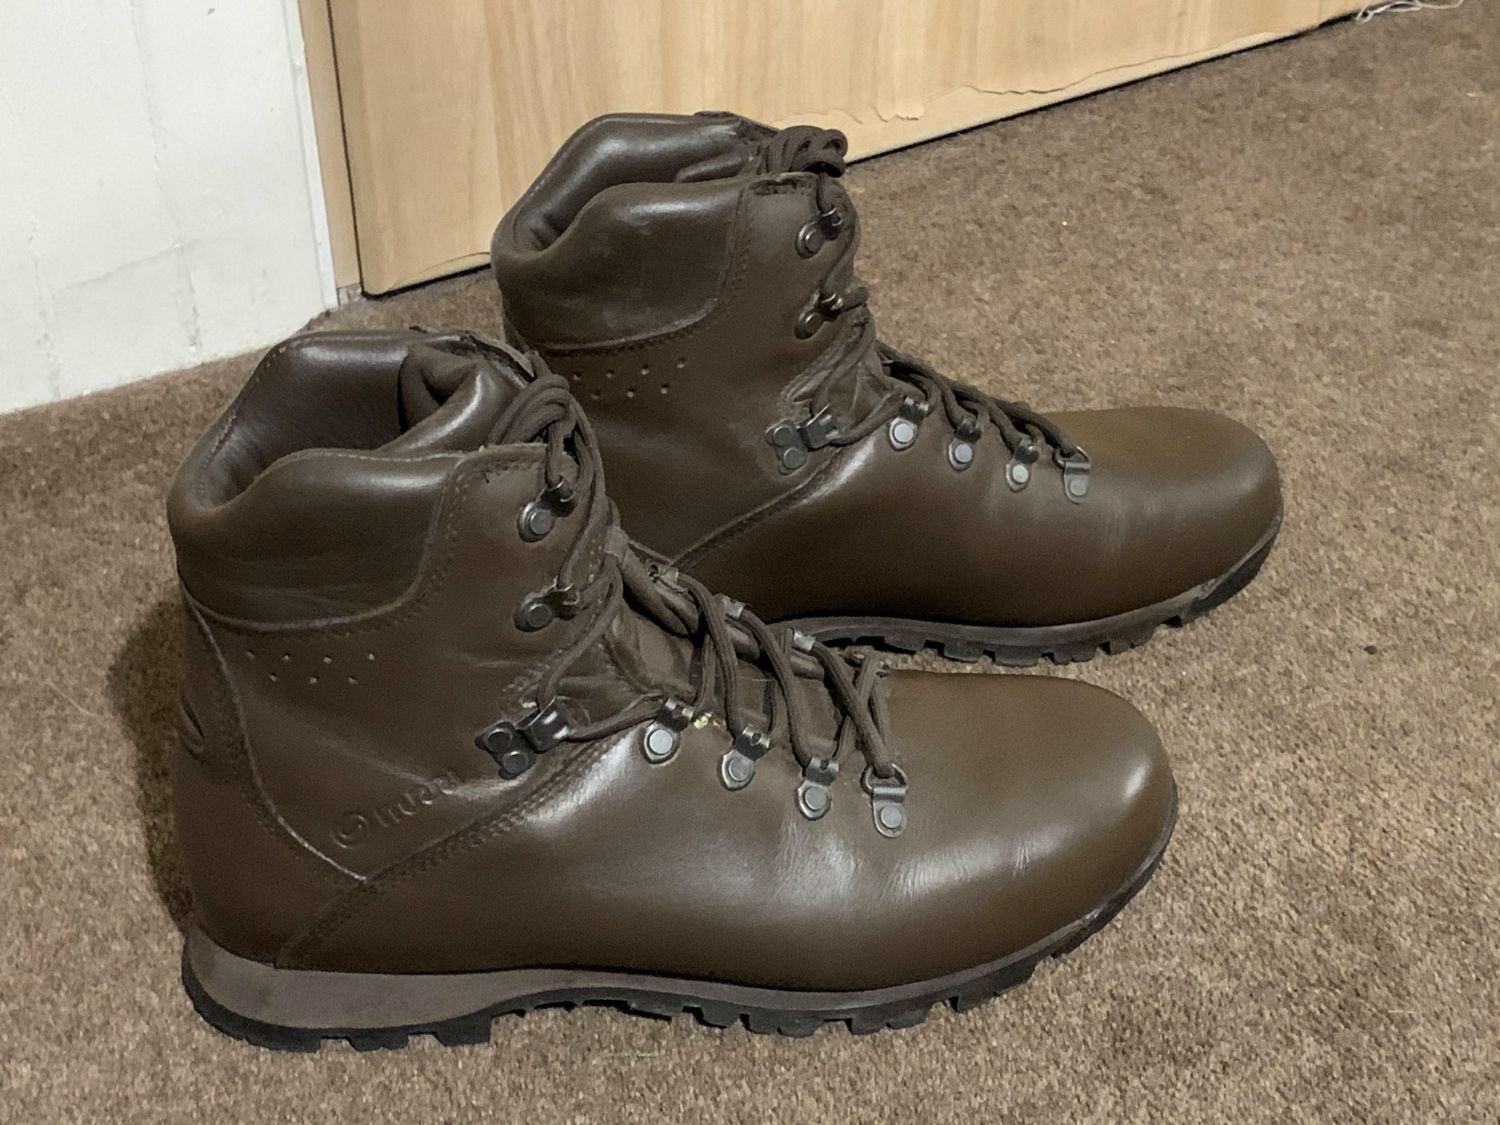 Iturri Patrol Boots MOD Brown Size 10 M - Gear - Airsoft Forums UK